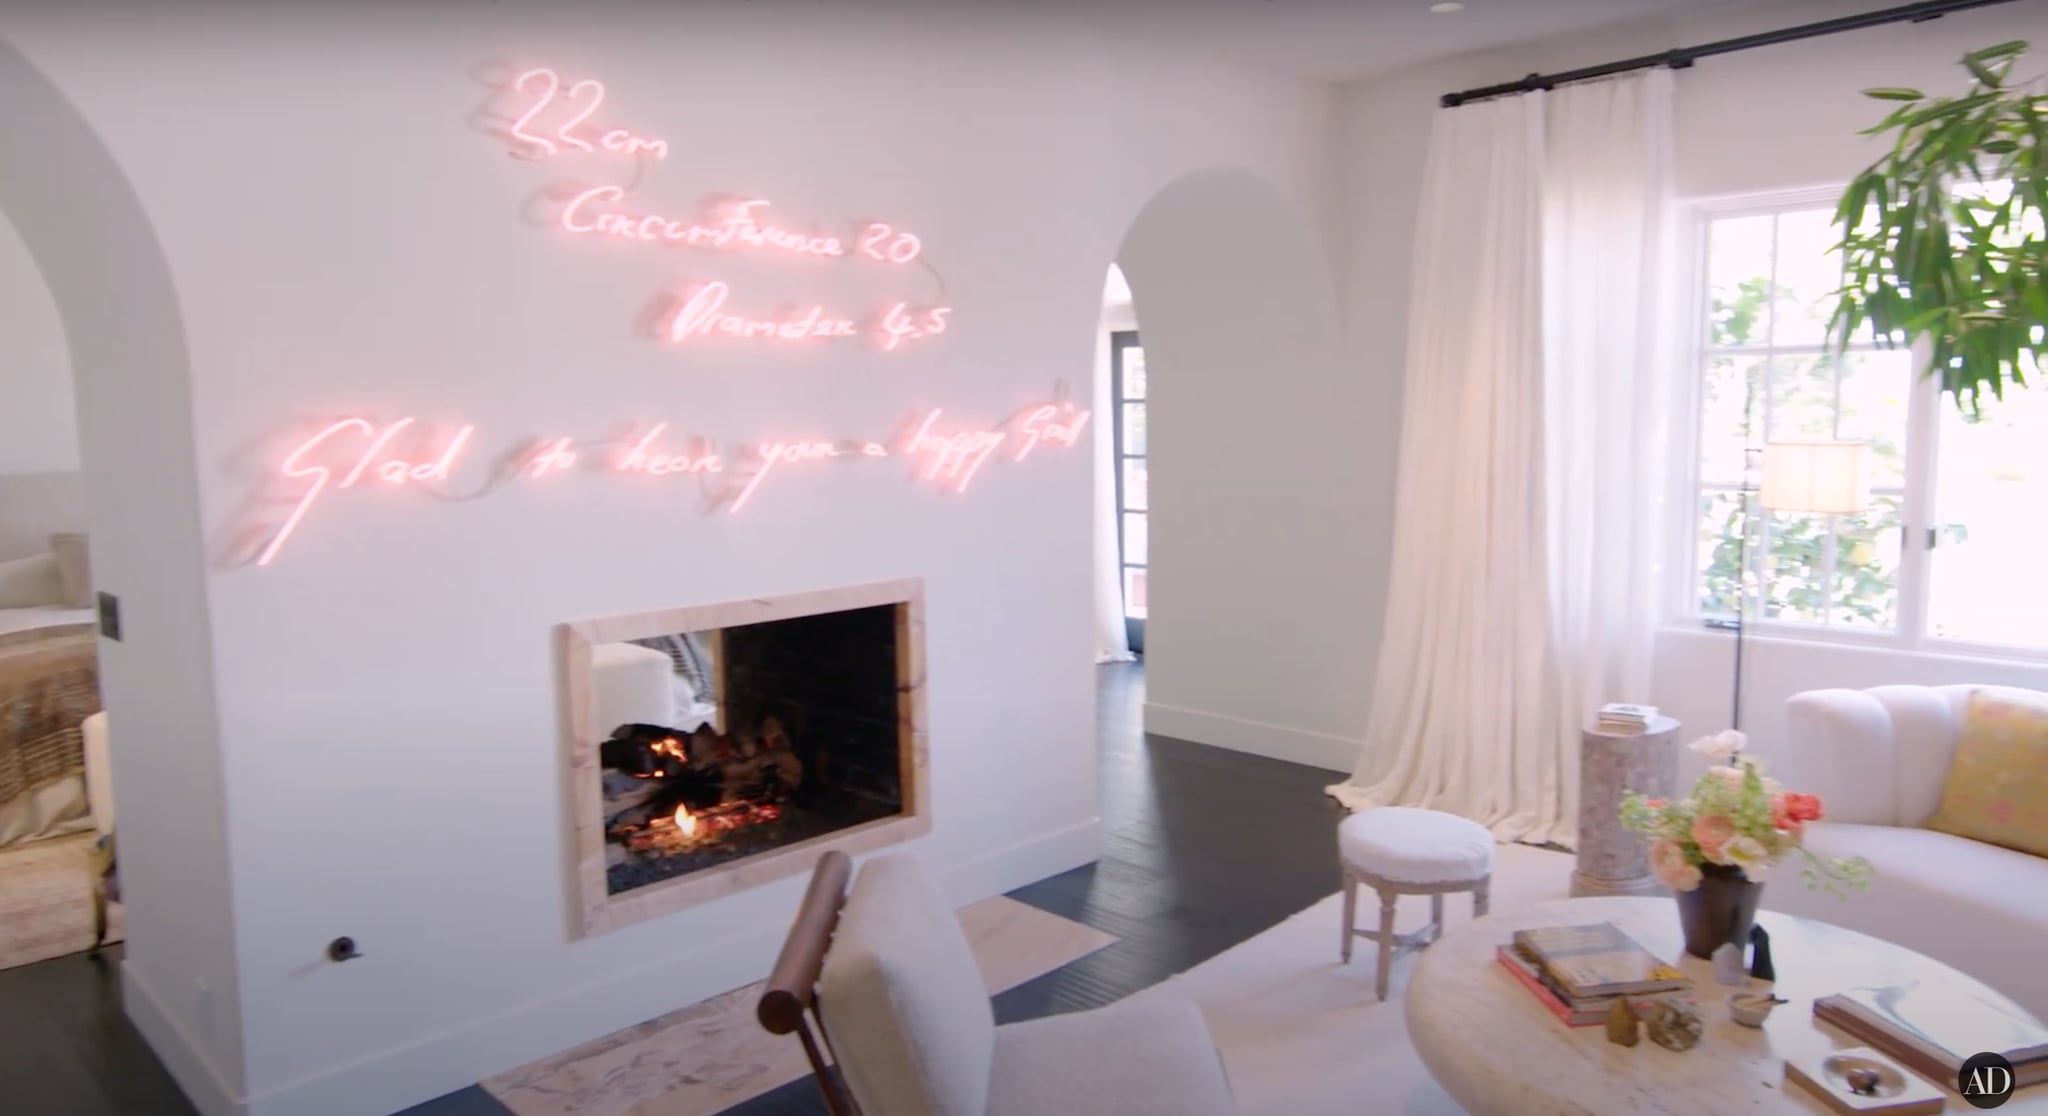 Kendall Jenner Shows Off Her LA Home in Architectural Digest ...